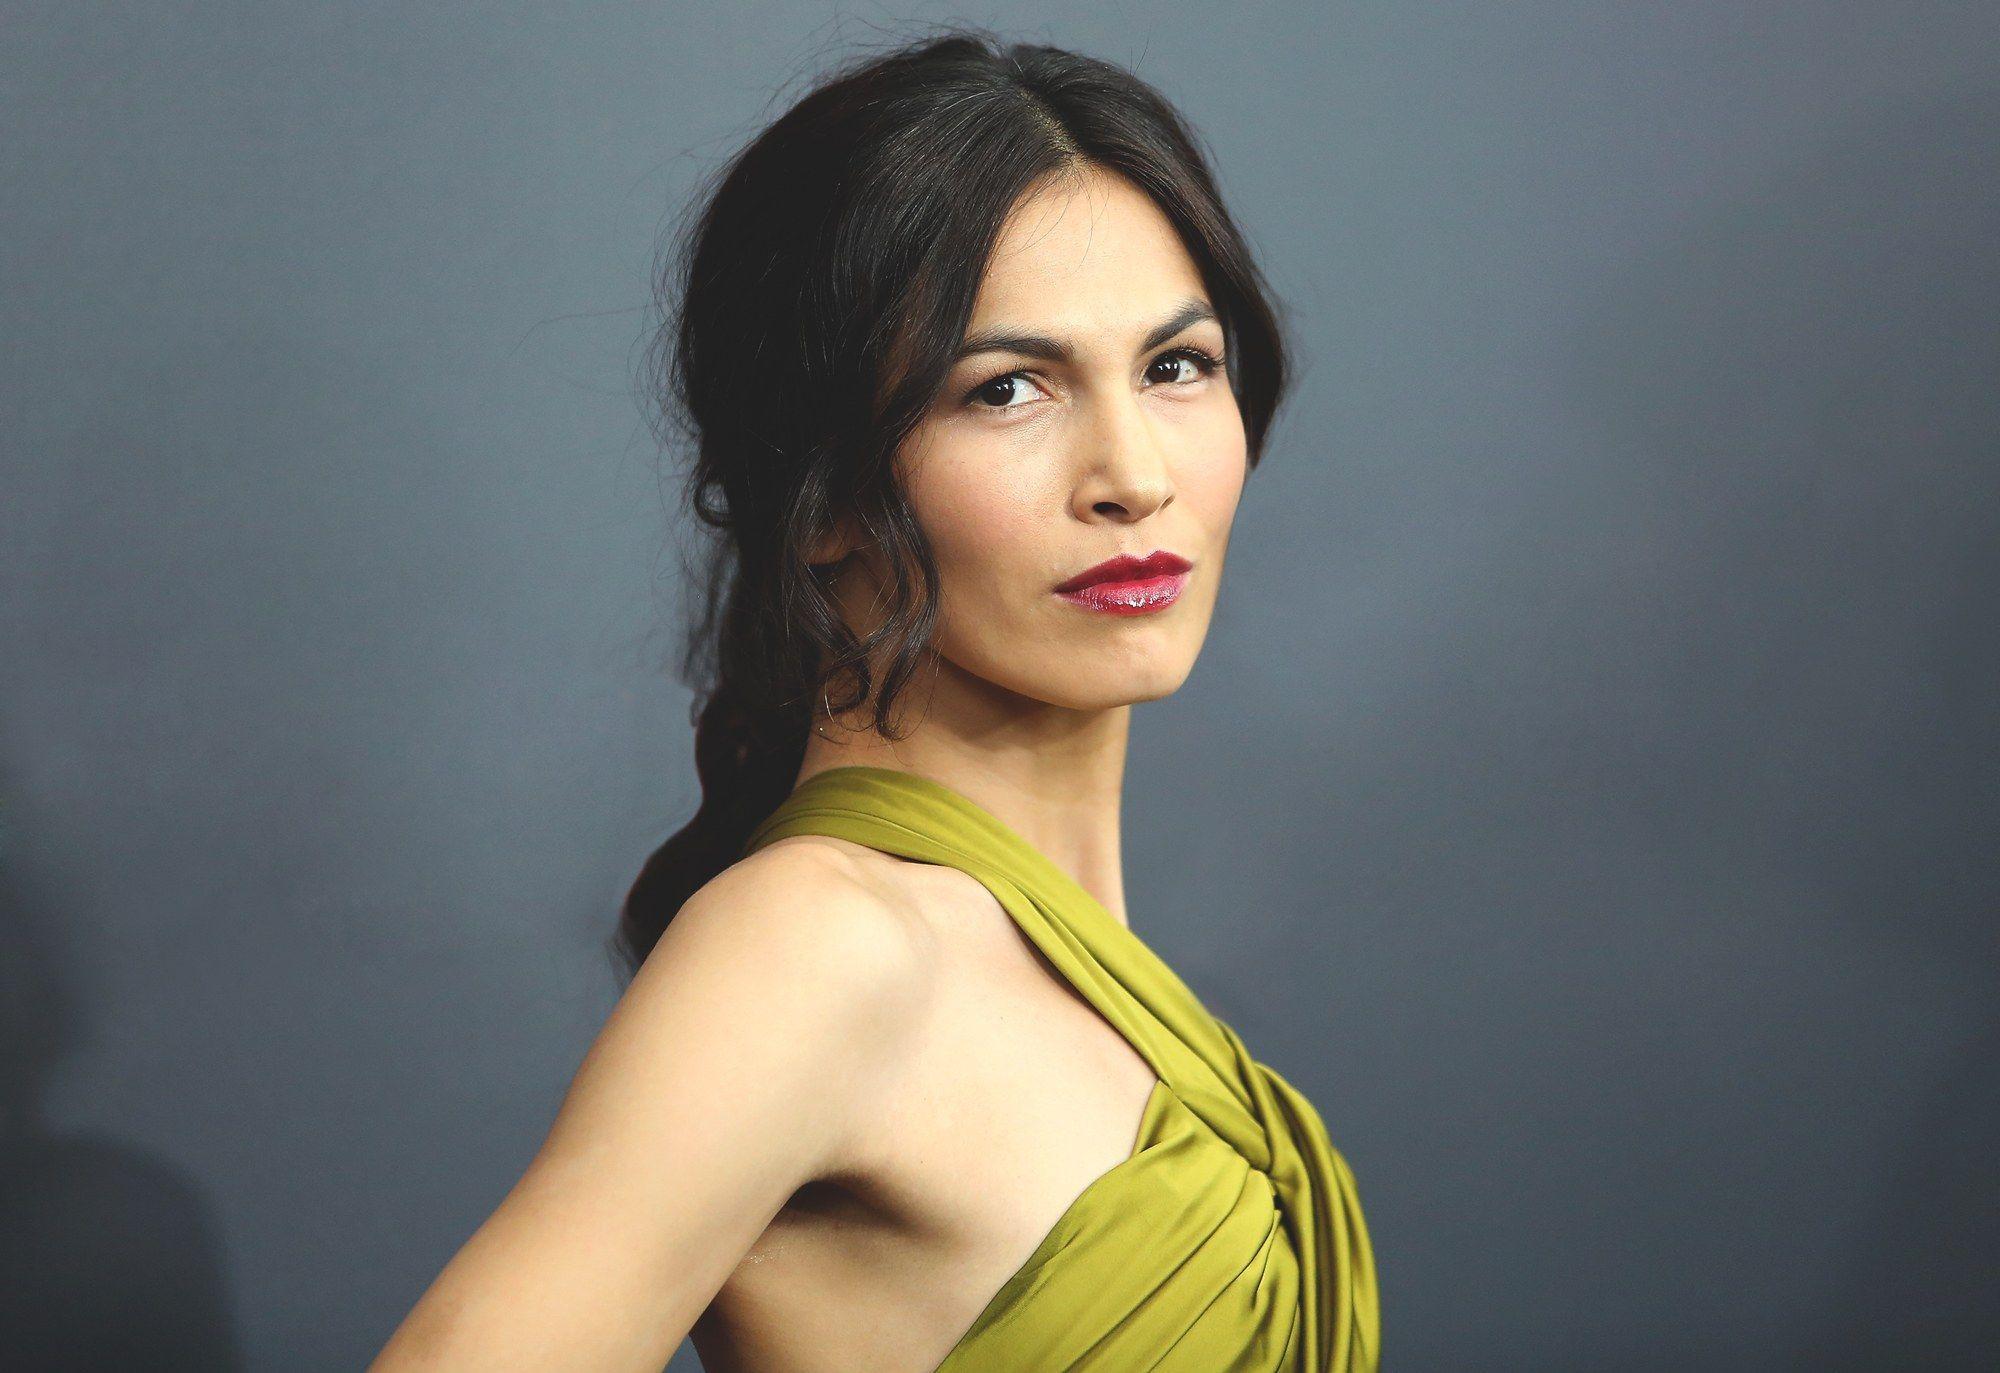 God's of Egypt' French actress Elodie Yung Photo & HD Wallpaper